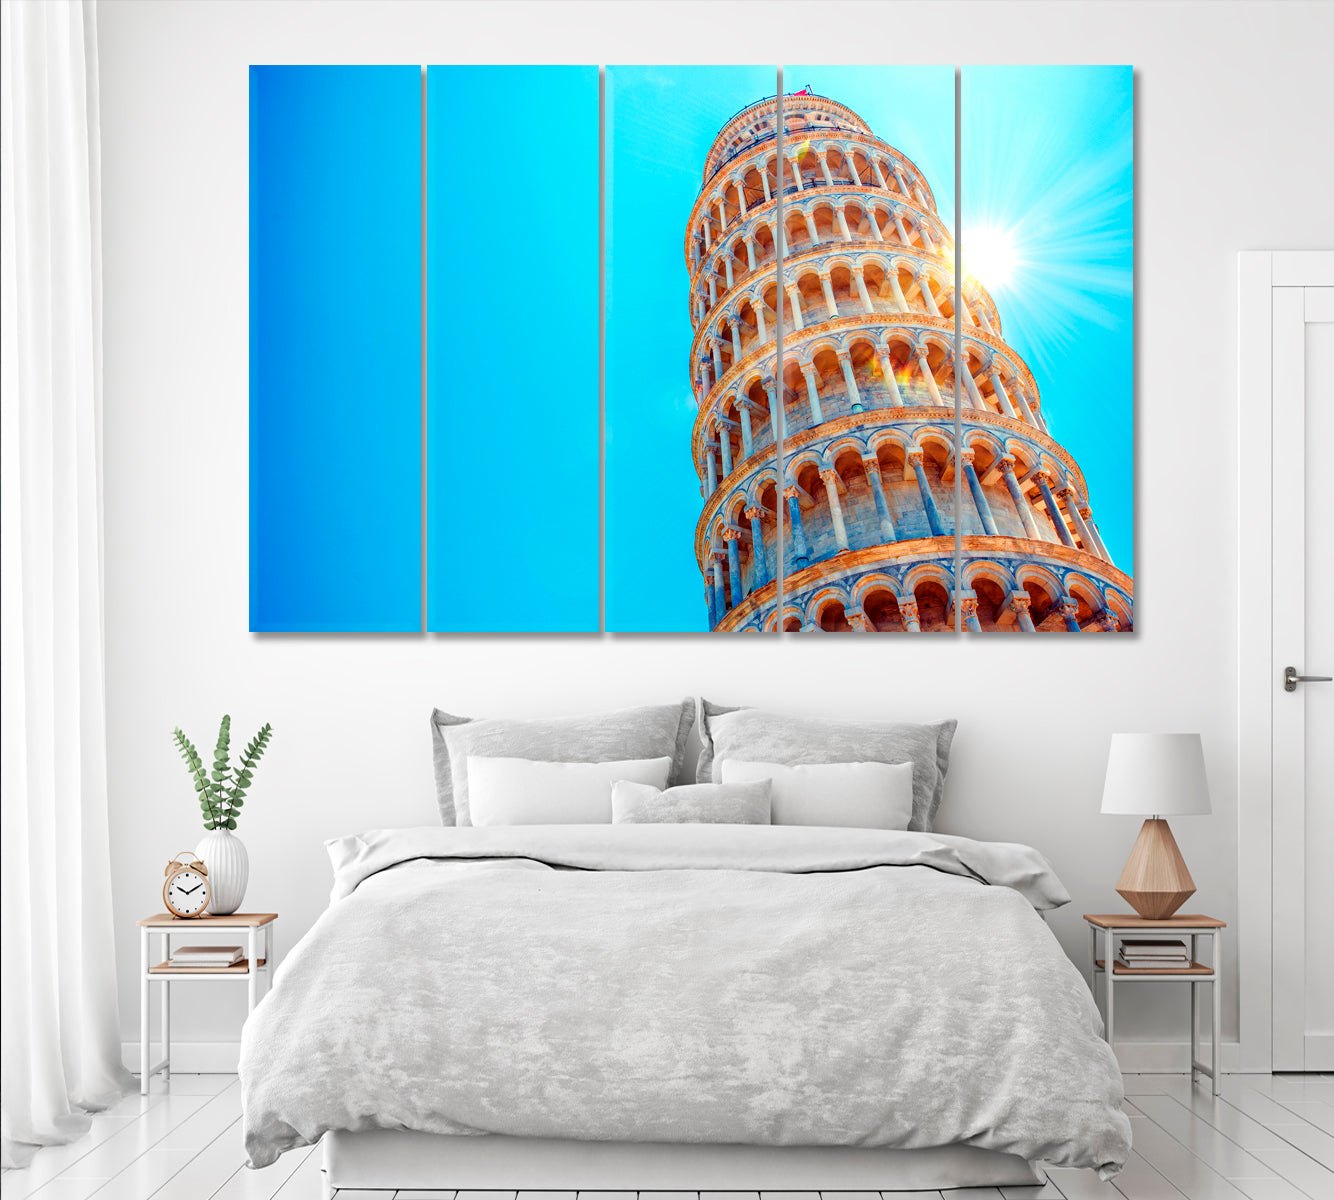 Leaning Tower of Pisa Italy Canvas Print ArtLexy 5 Panels 36"x24" inches 